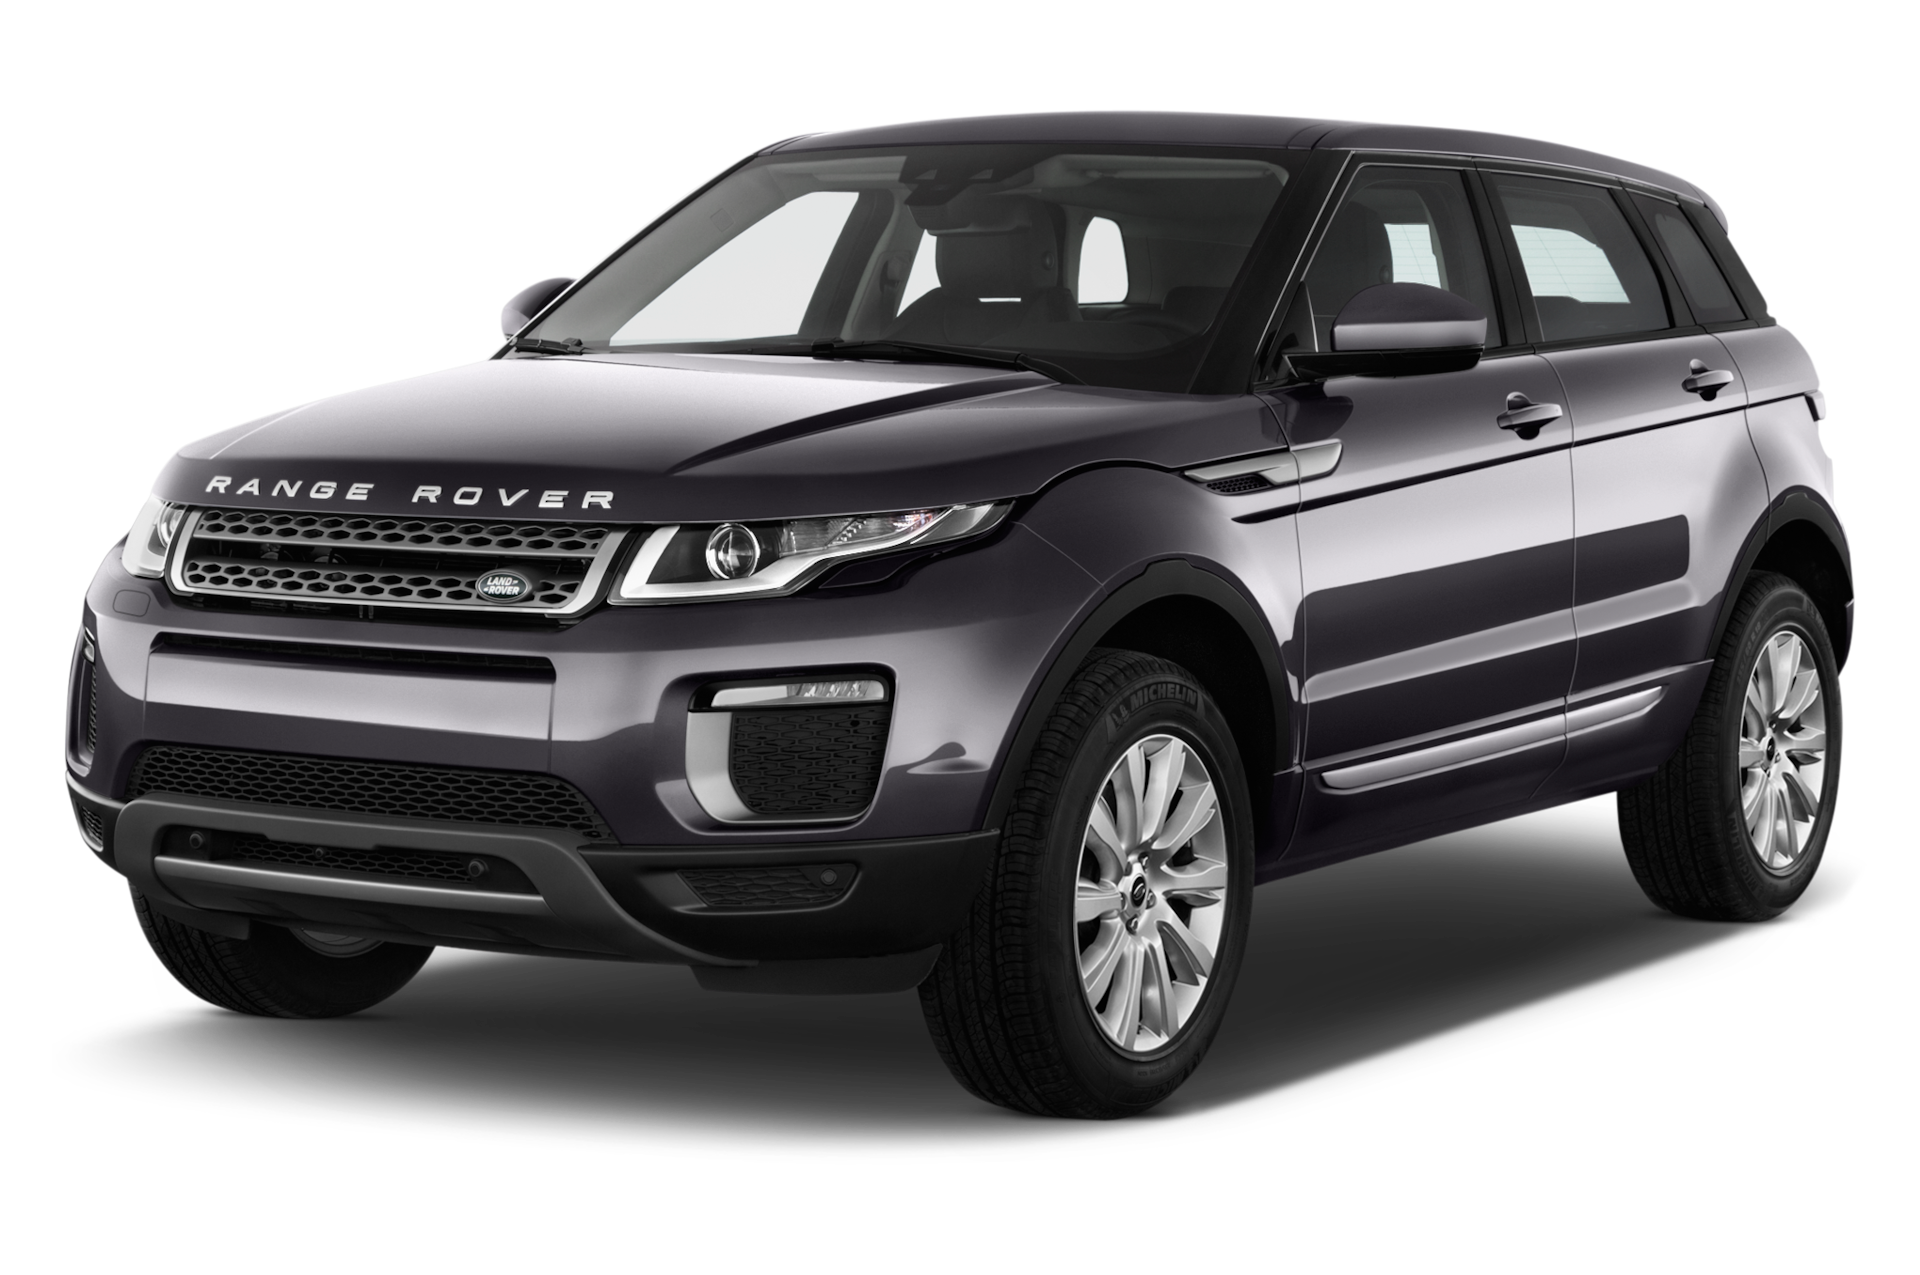 2018 Land Rover Range Rover Evoque Prices, Reviews, and Photos - MotorTrend